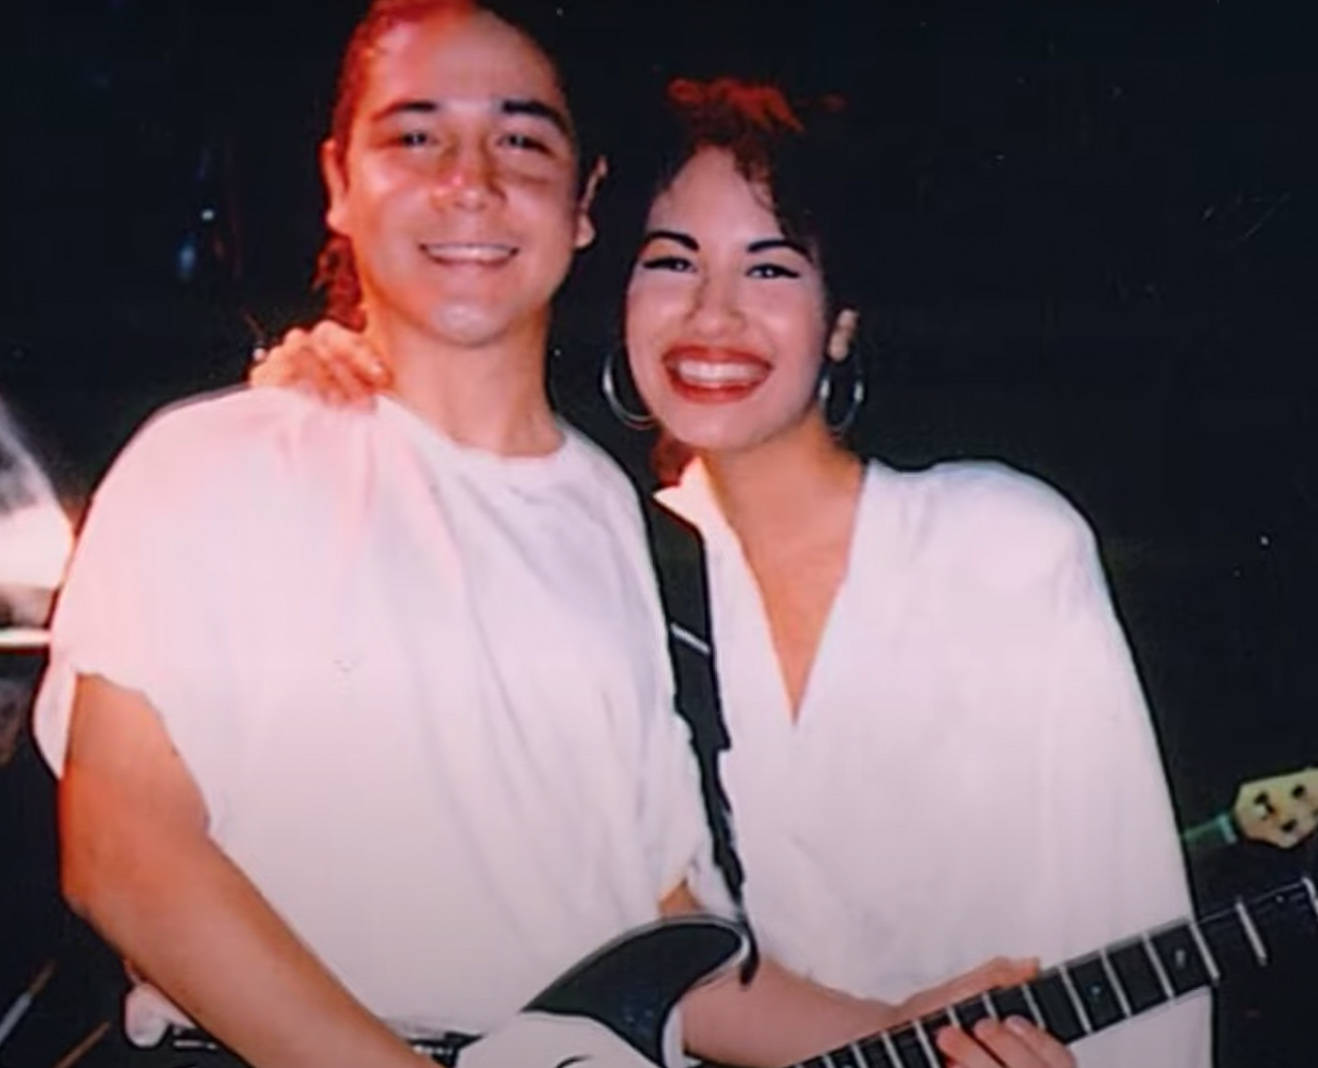 Queen Of Tejano Music: Selena Quintanilla On Stage